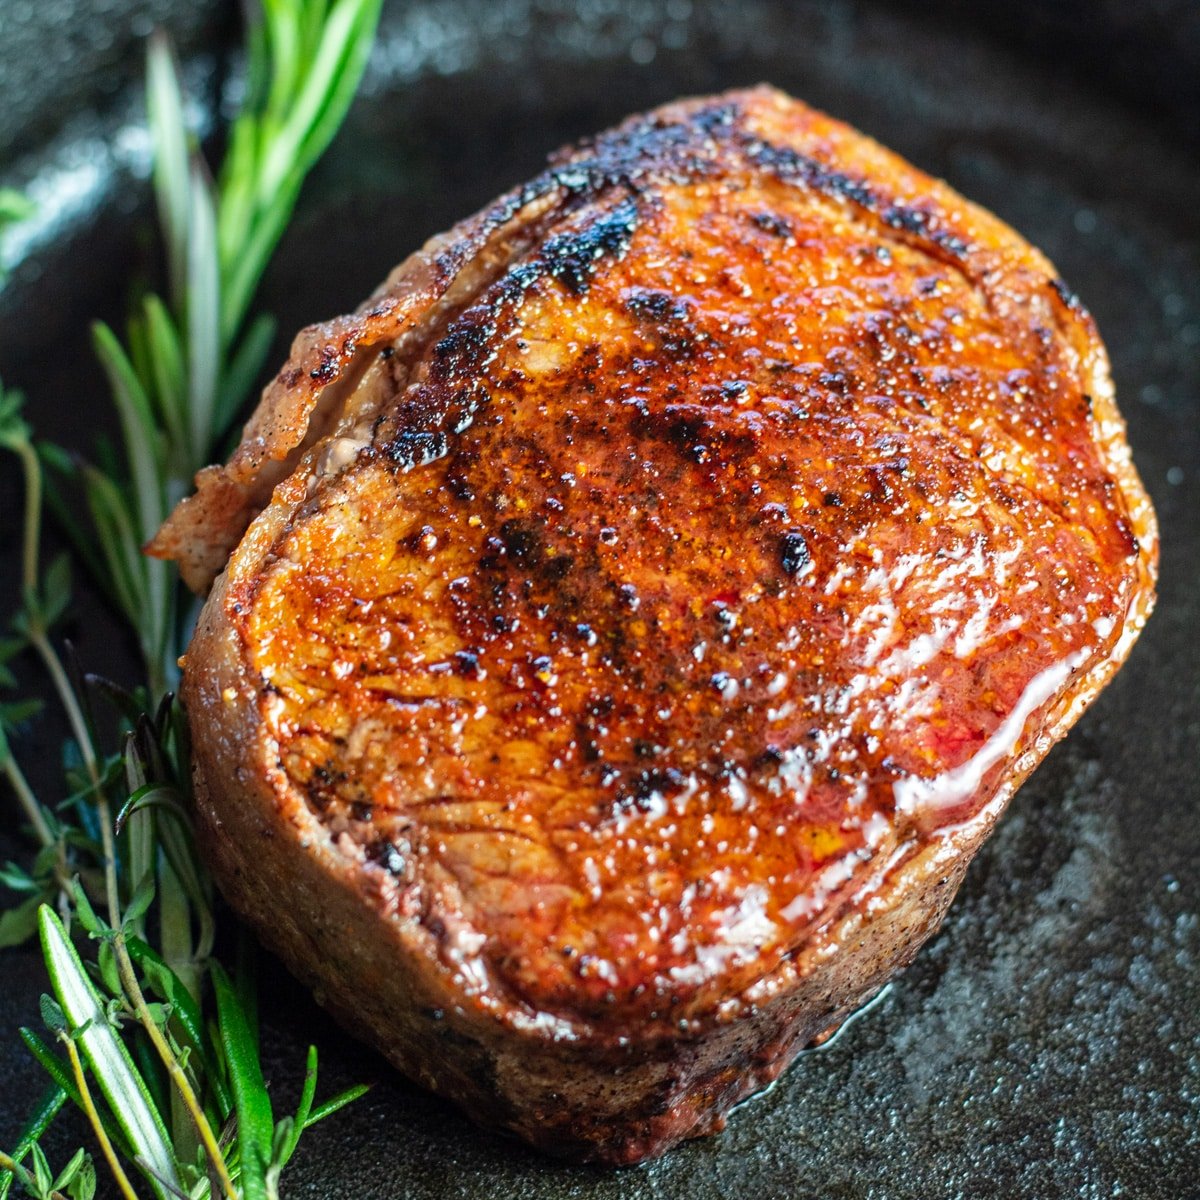 https://bakeitwithlove.com/wp-content/uploads/2022/12/bacon-wrapped-filet-mignon-sq.jpg